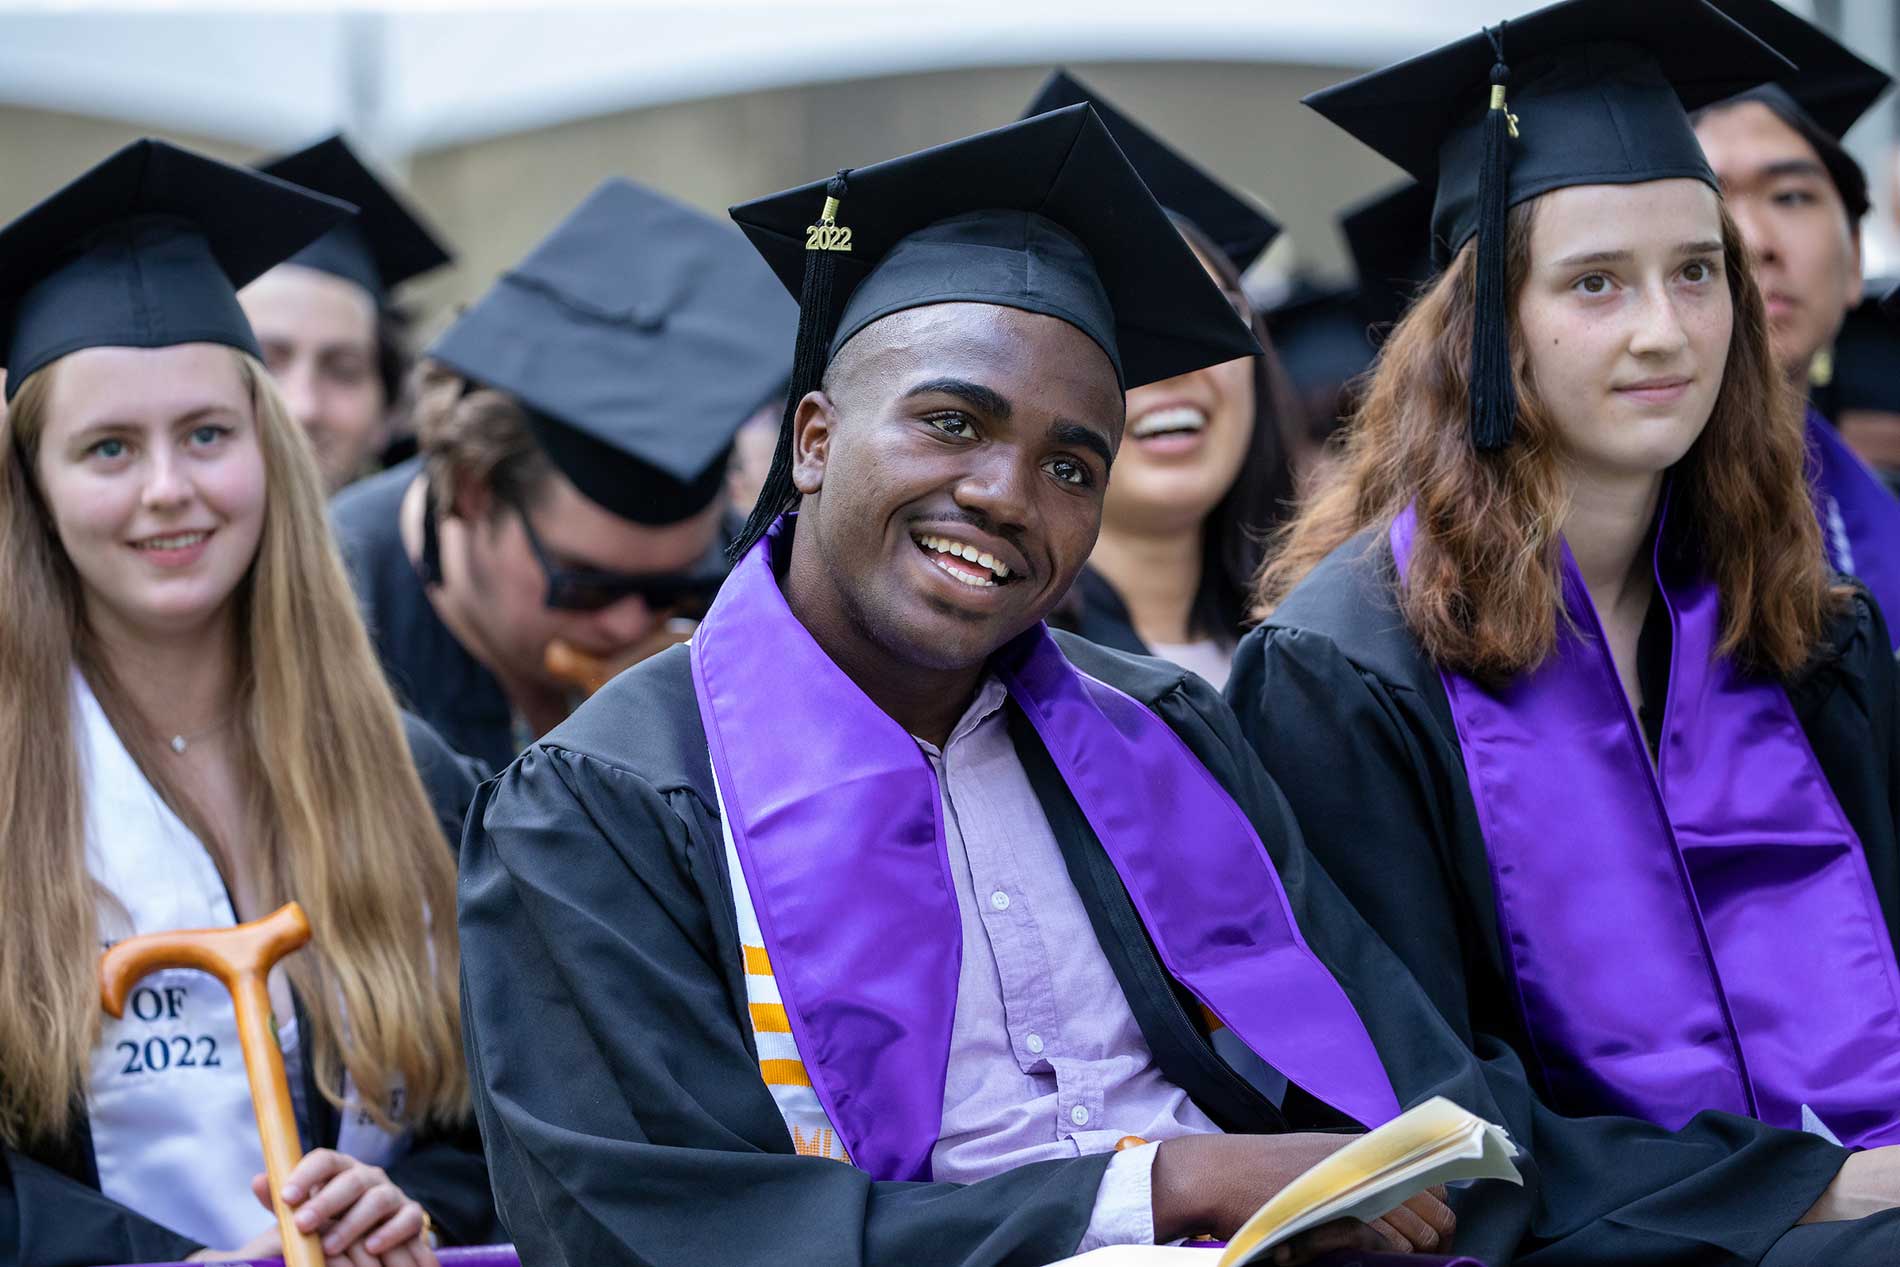 Abdullah Brownel ’22, the student commencement speaker, smiles while sitting with his classmates.